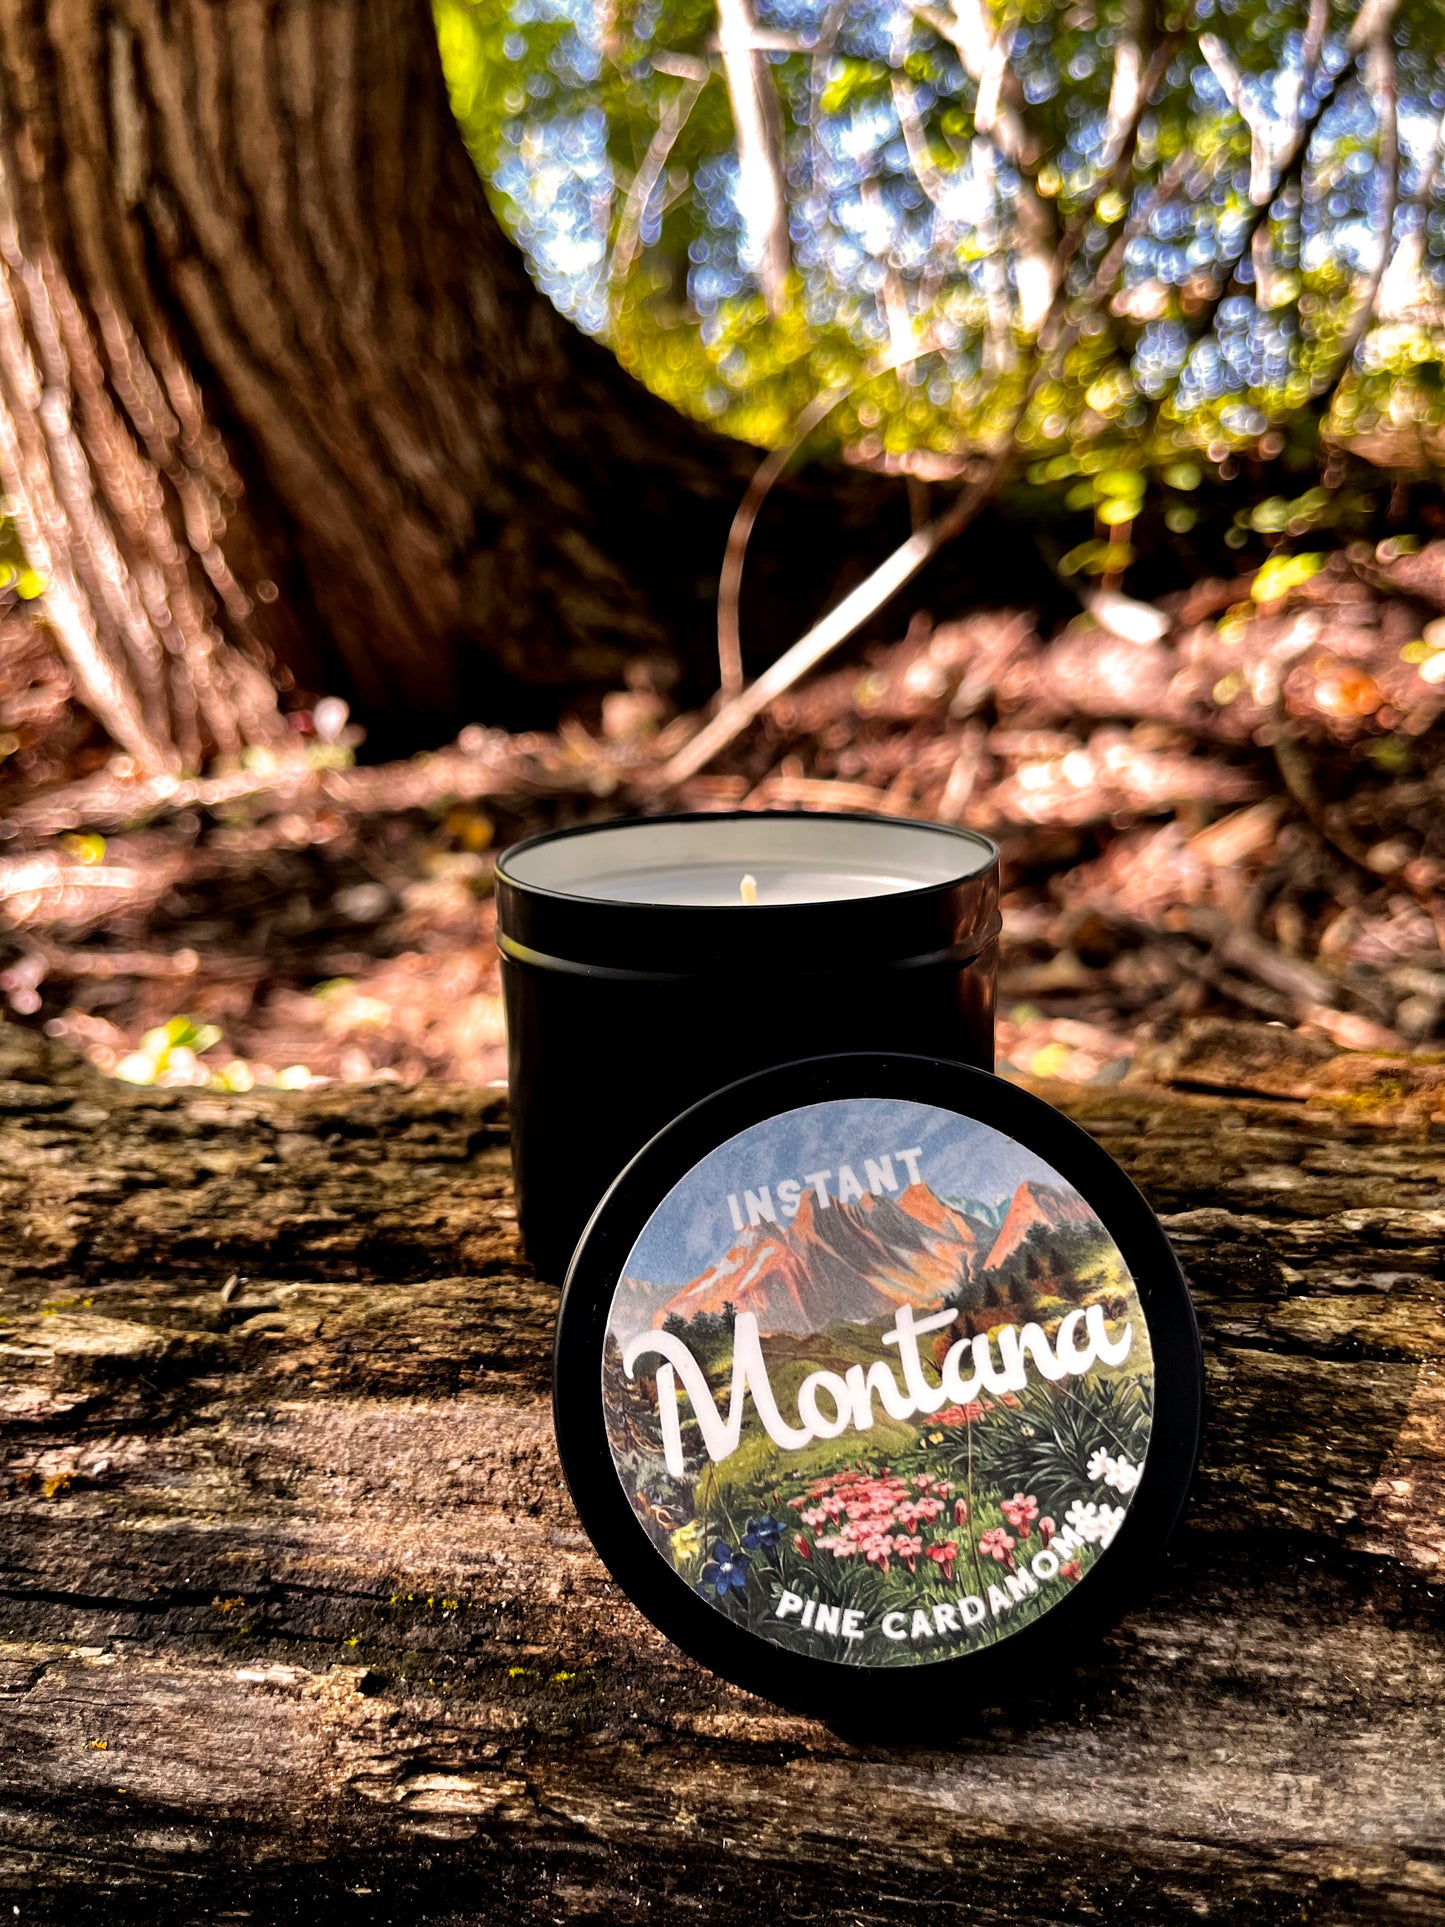 Instant Montana Scented Candle Tin